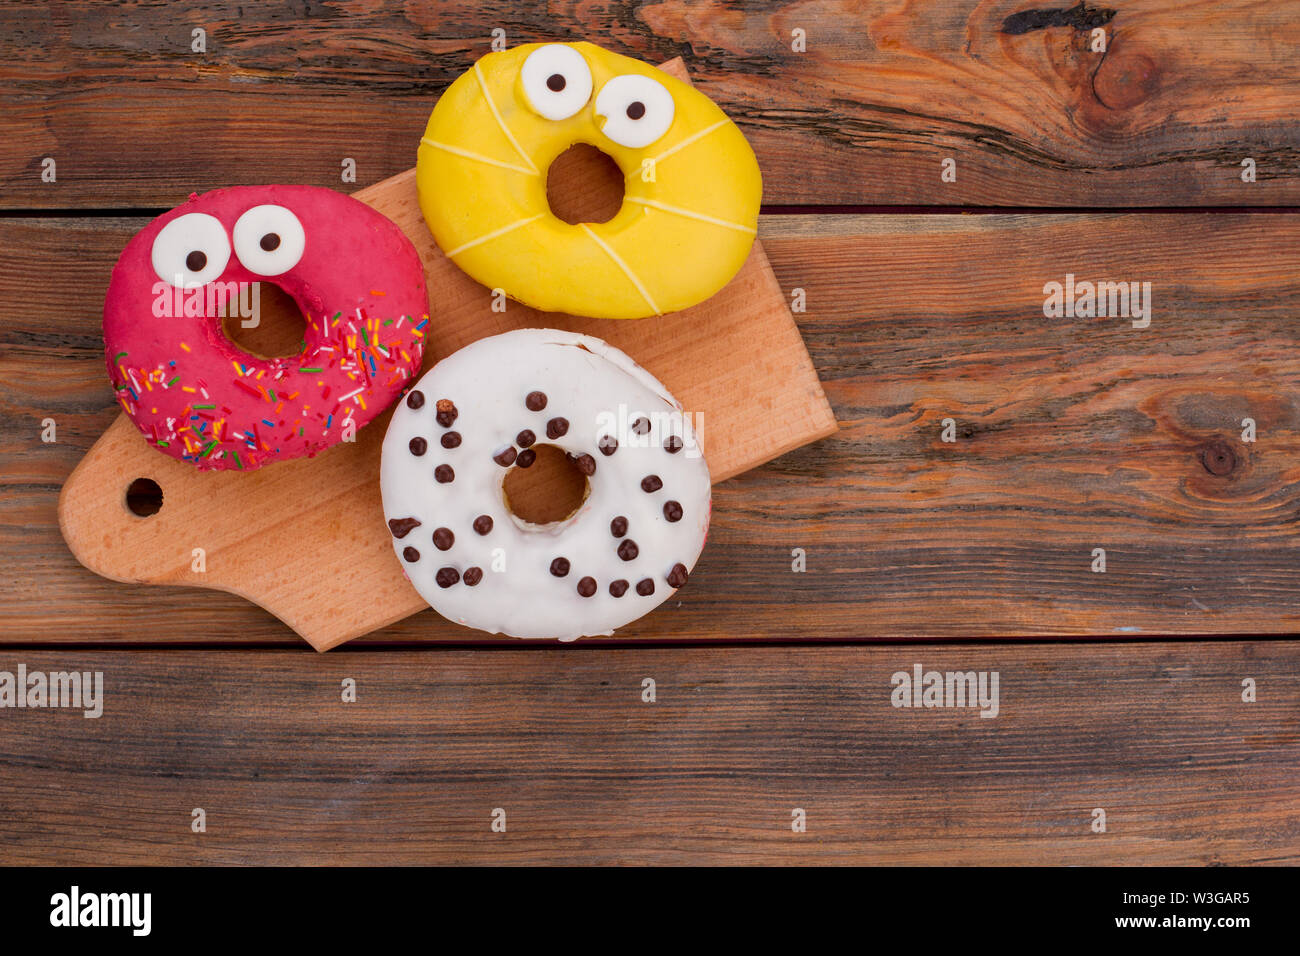 Funny decorated donuts on wooden background. Stock Photo